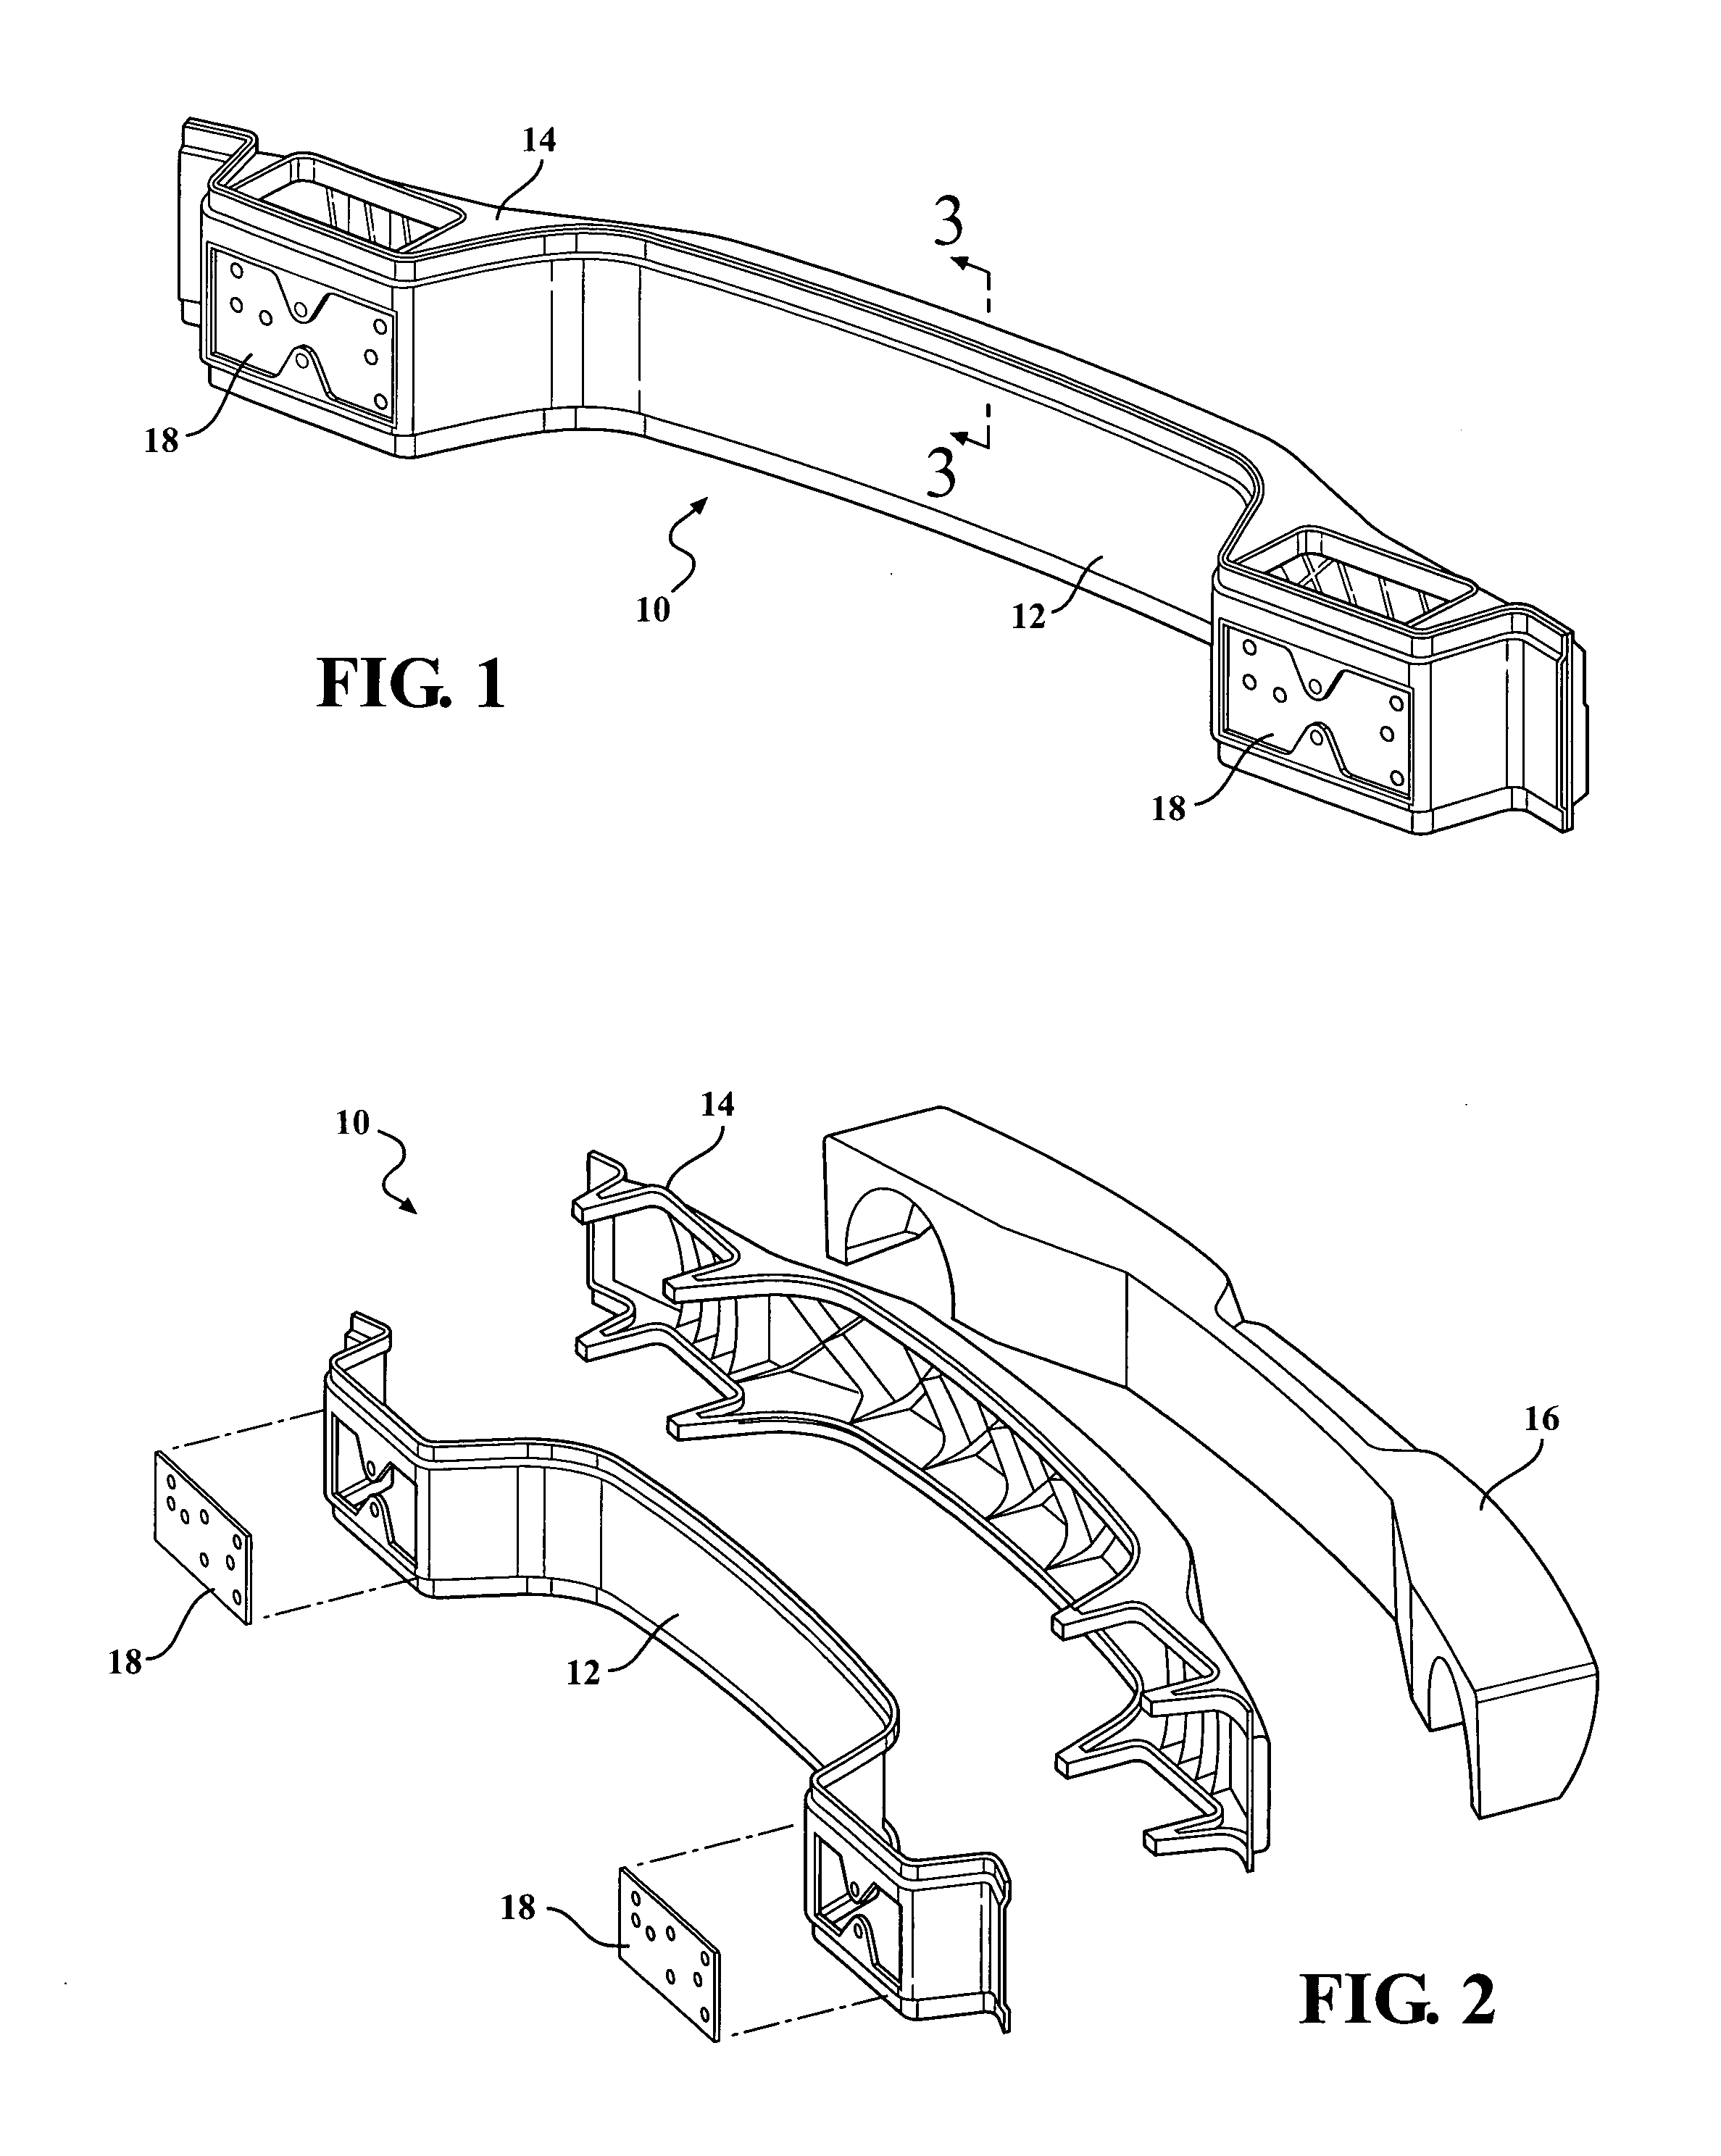 Bumper beam with integrated energy absorber